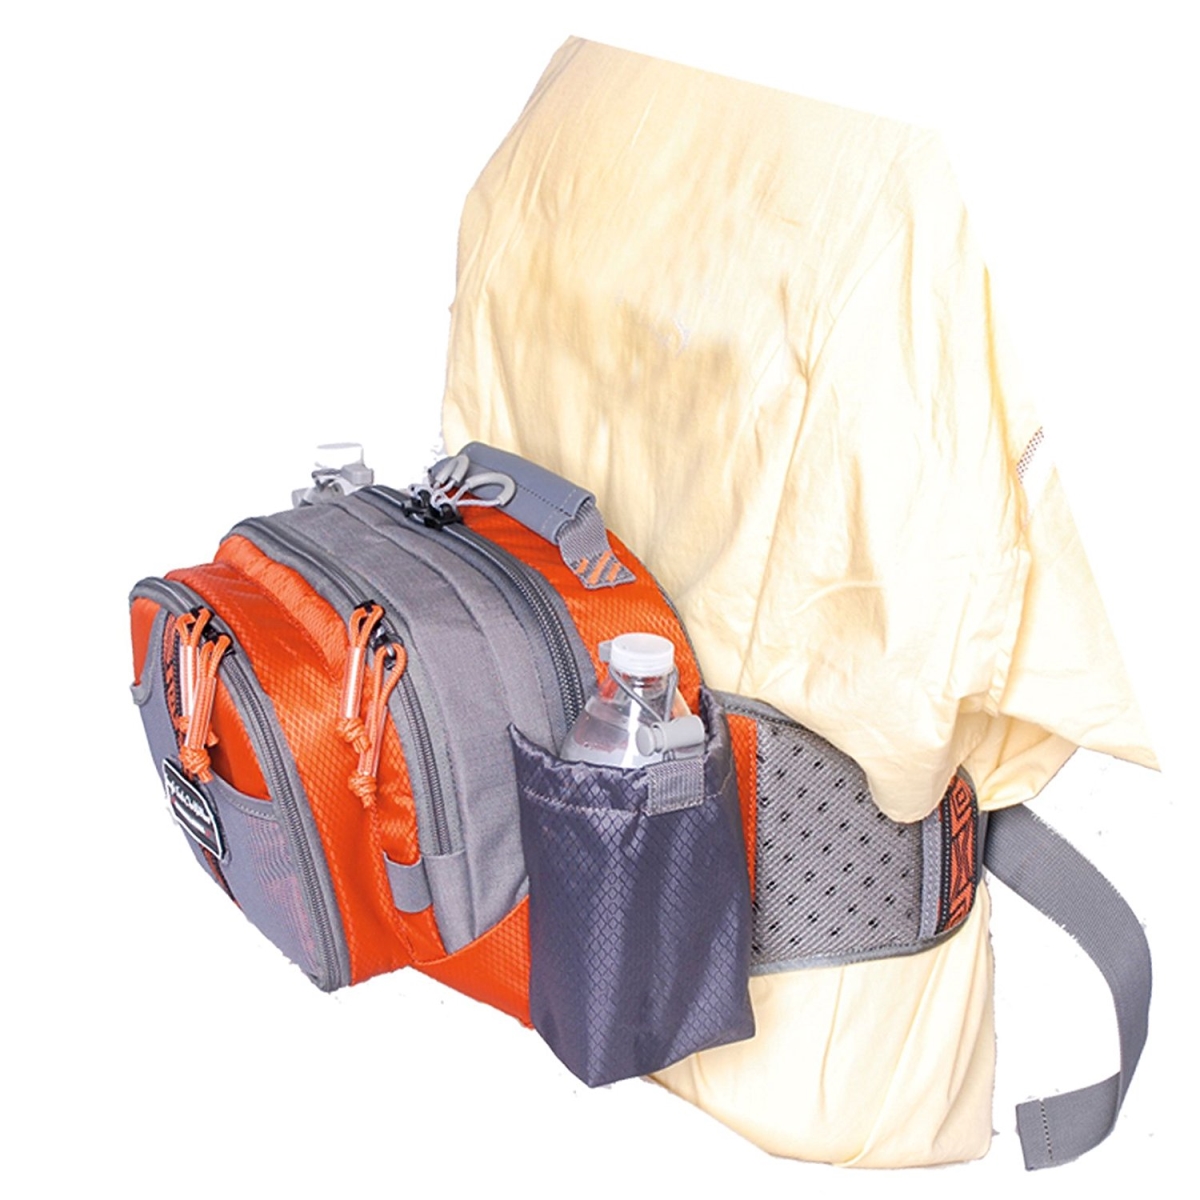 13 X 1 X 1 In. Hybrid Backpack & Chest Pack